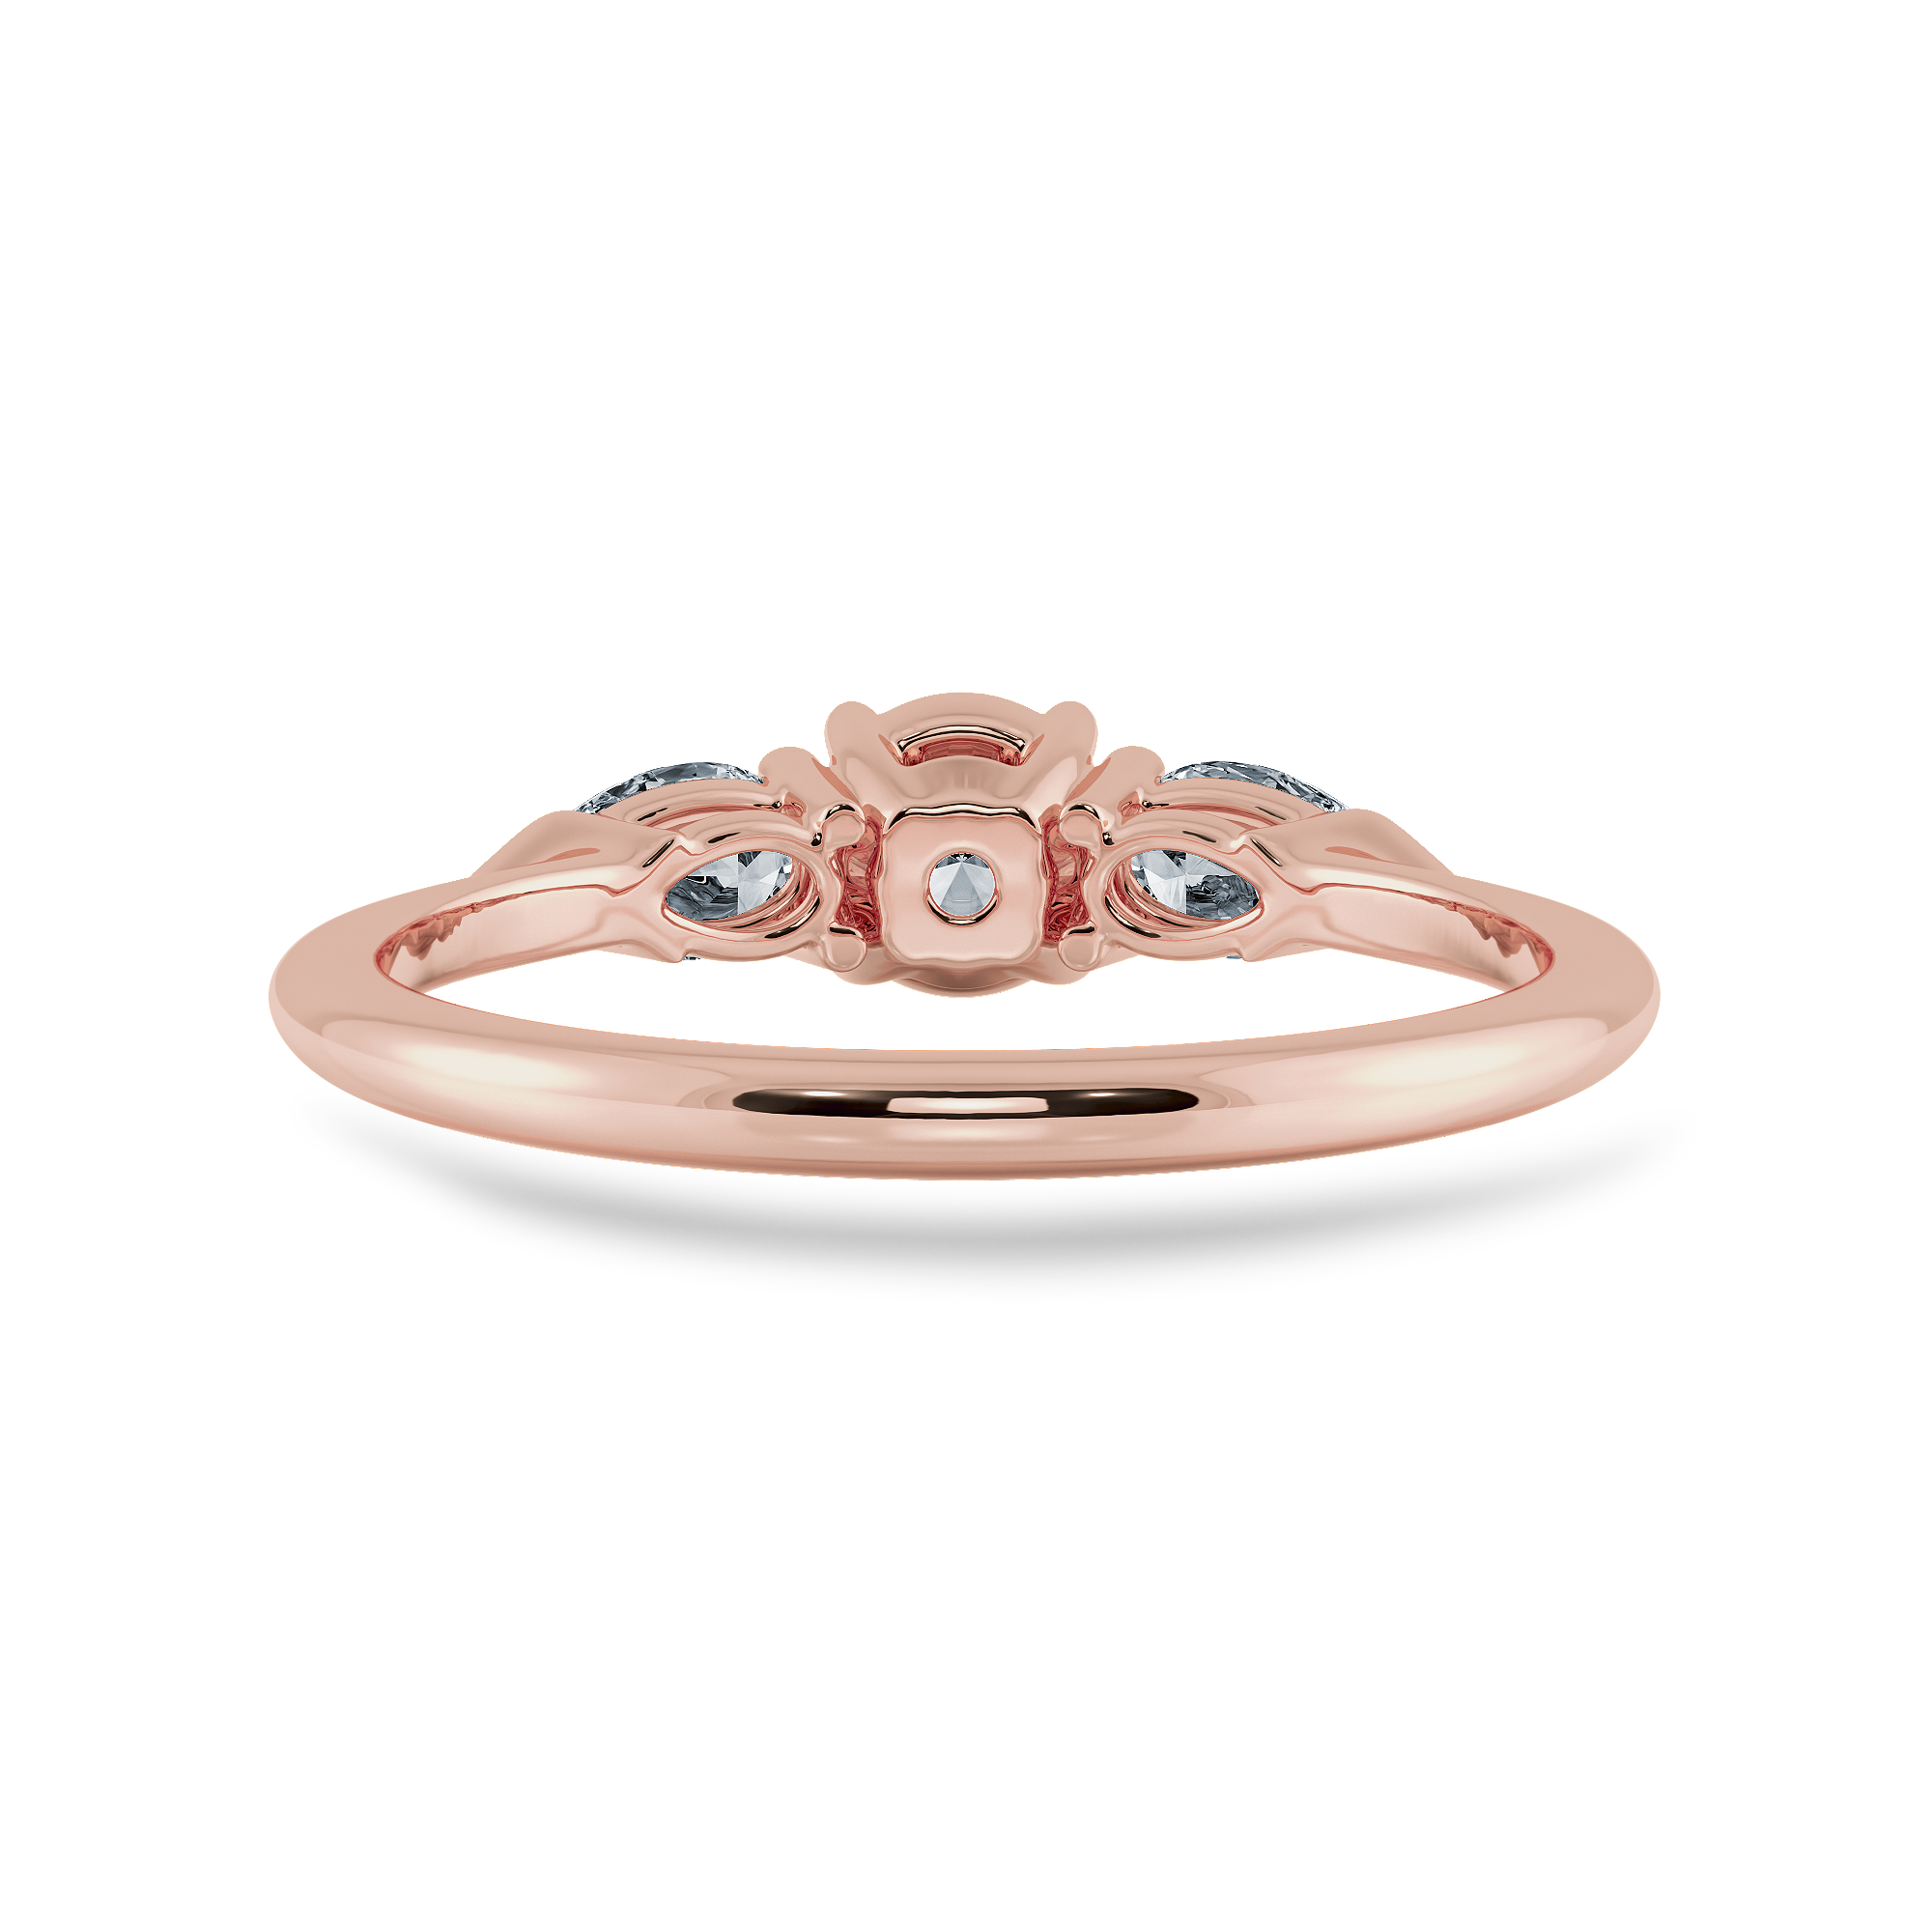 0.20 cts. Solitaire with Pear Cut Diamond Accents 18K Rose Gold Ring JL AU 2020R-C   Jewelove.US